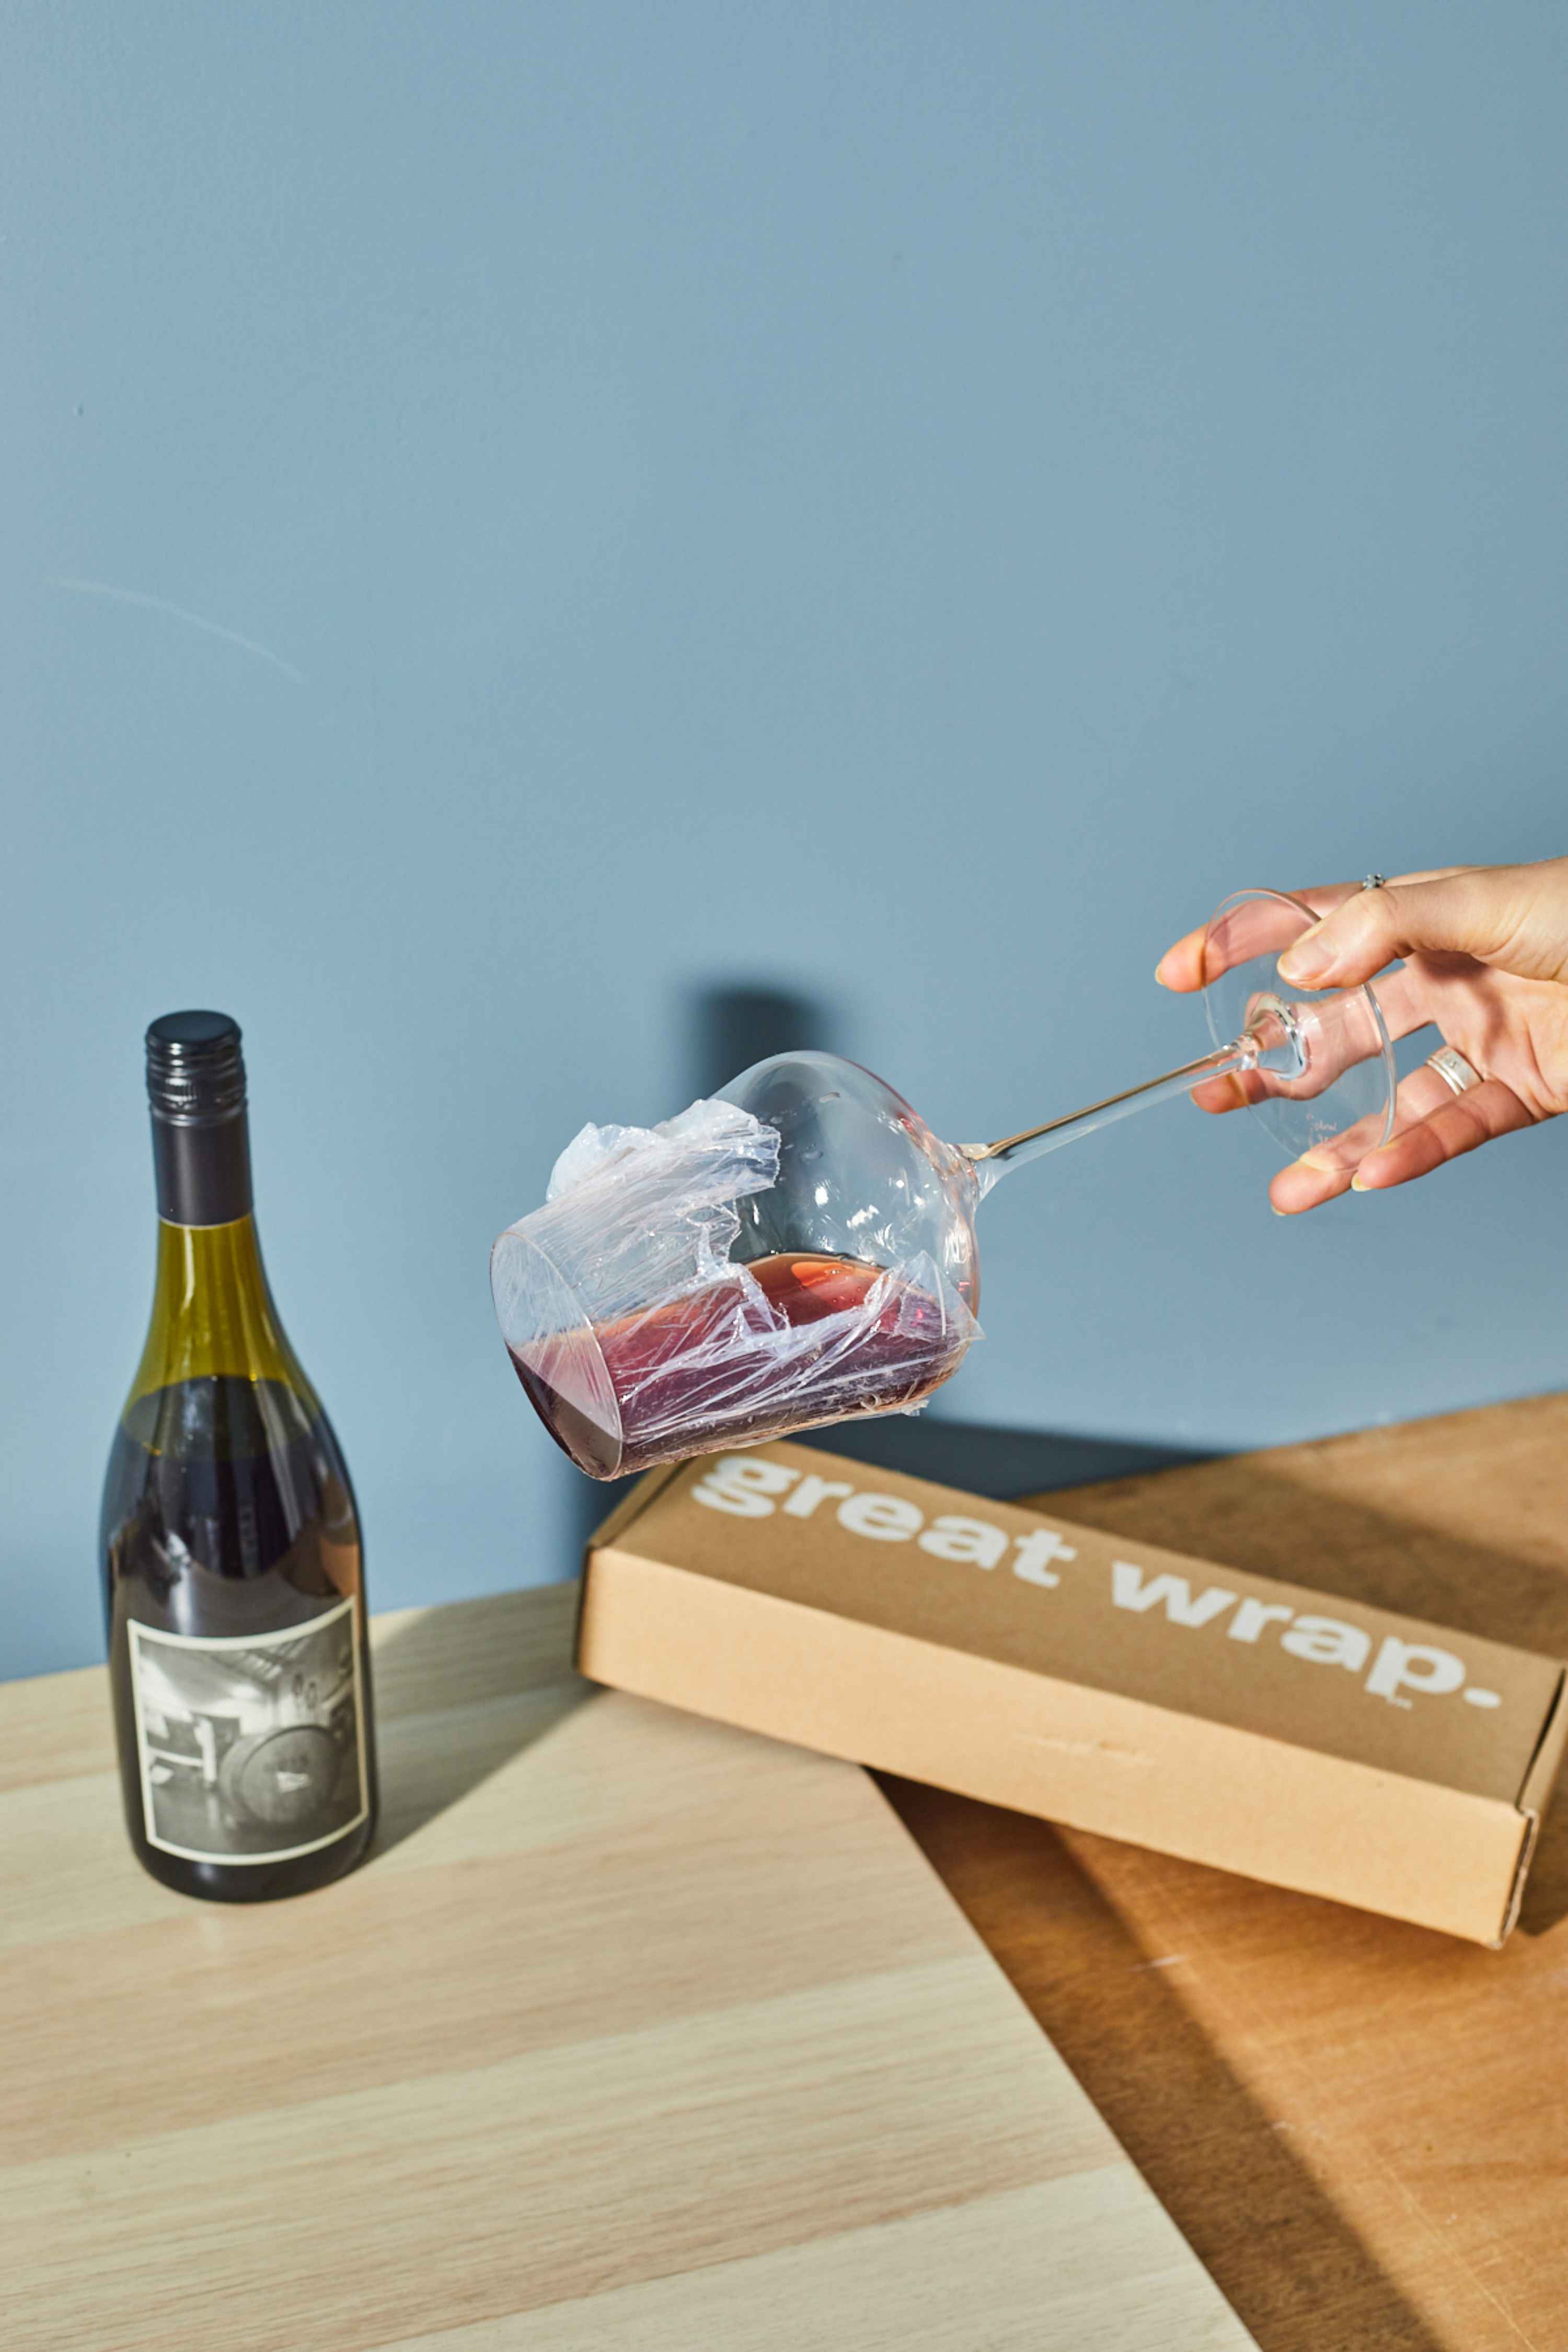 Meet Great Wrap, the completely compostable cling wrap